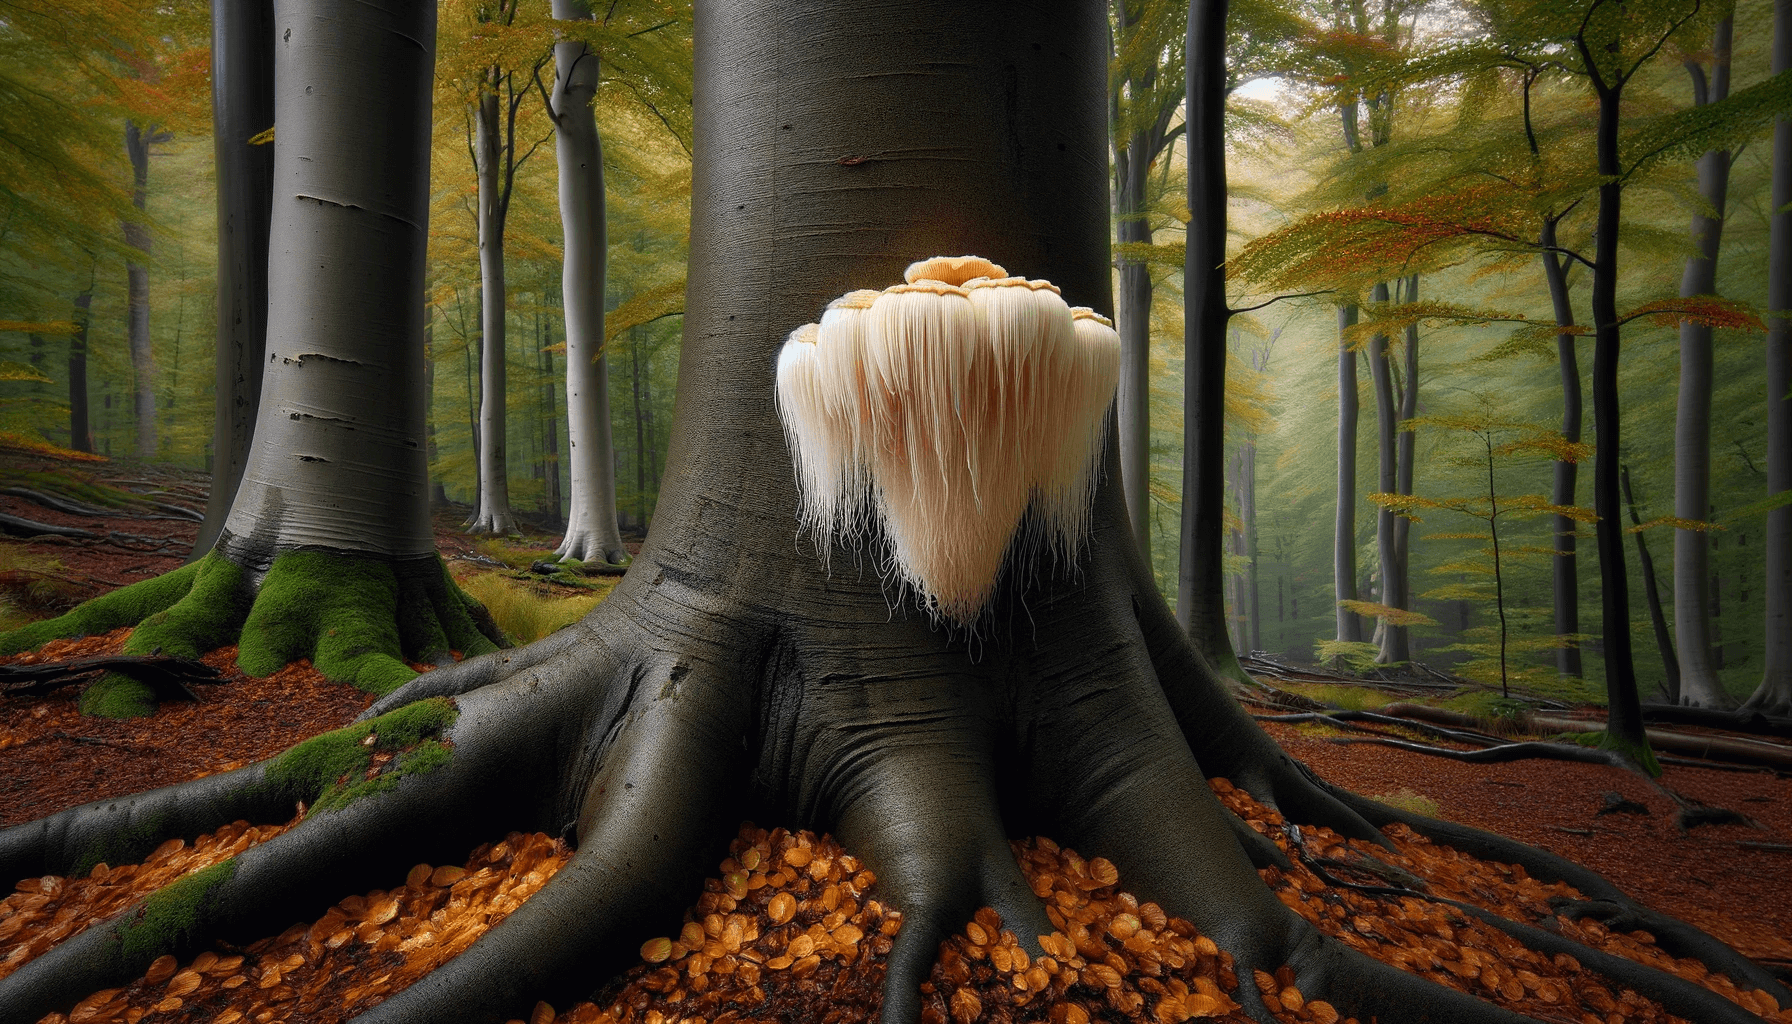 Lion's Mane mushroom growing high on the trunk of a large living tree. The mushroom stands out as a white beacon against the dark bark of the tree.